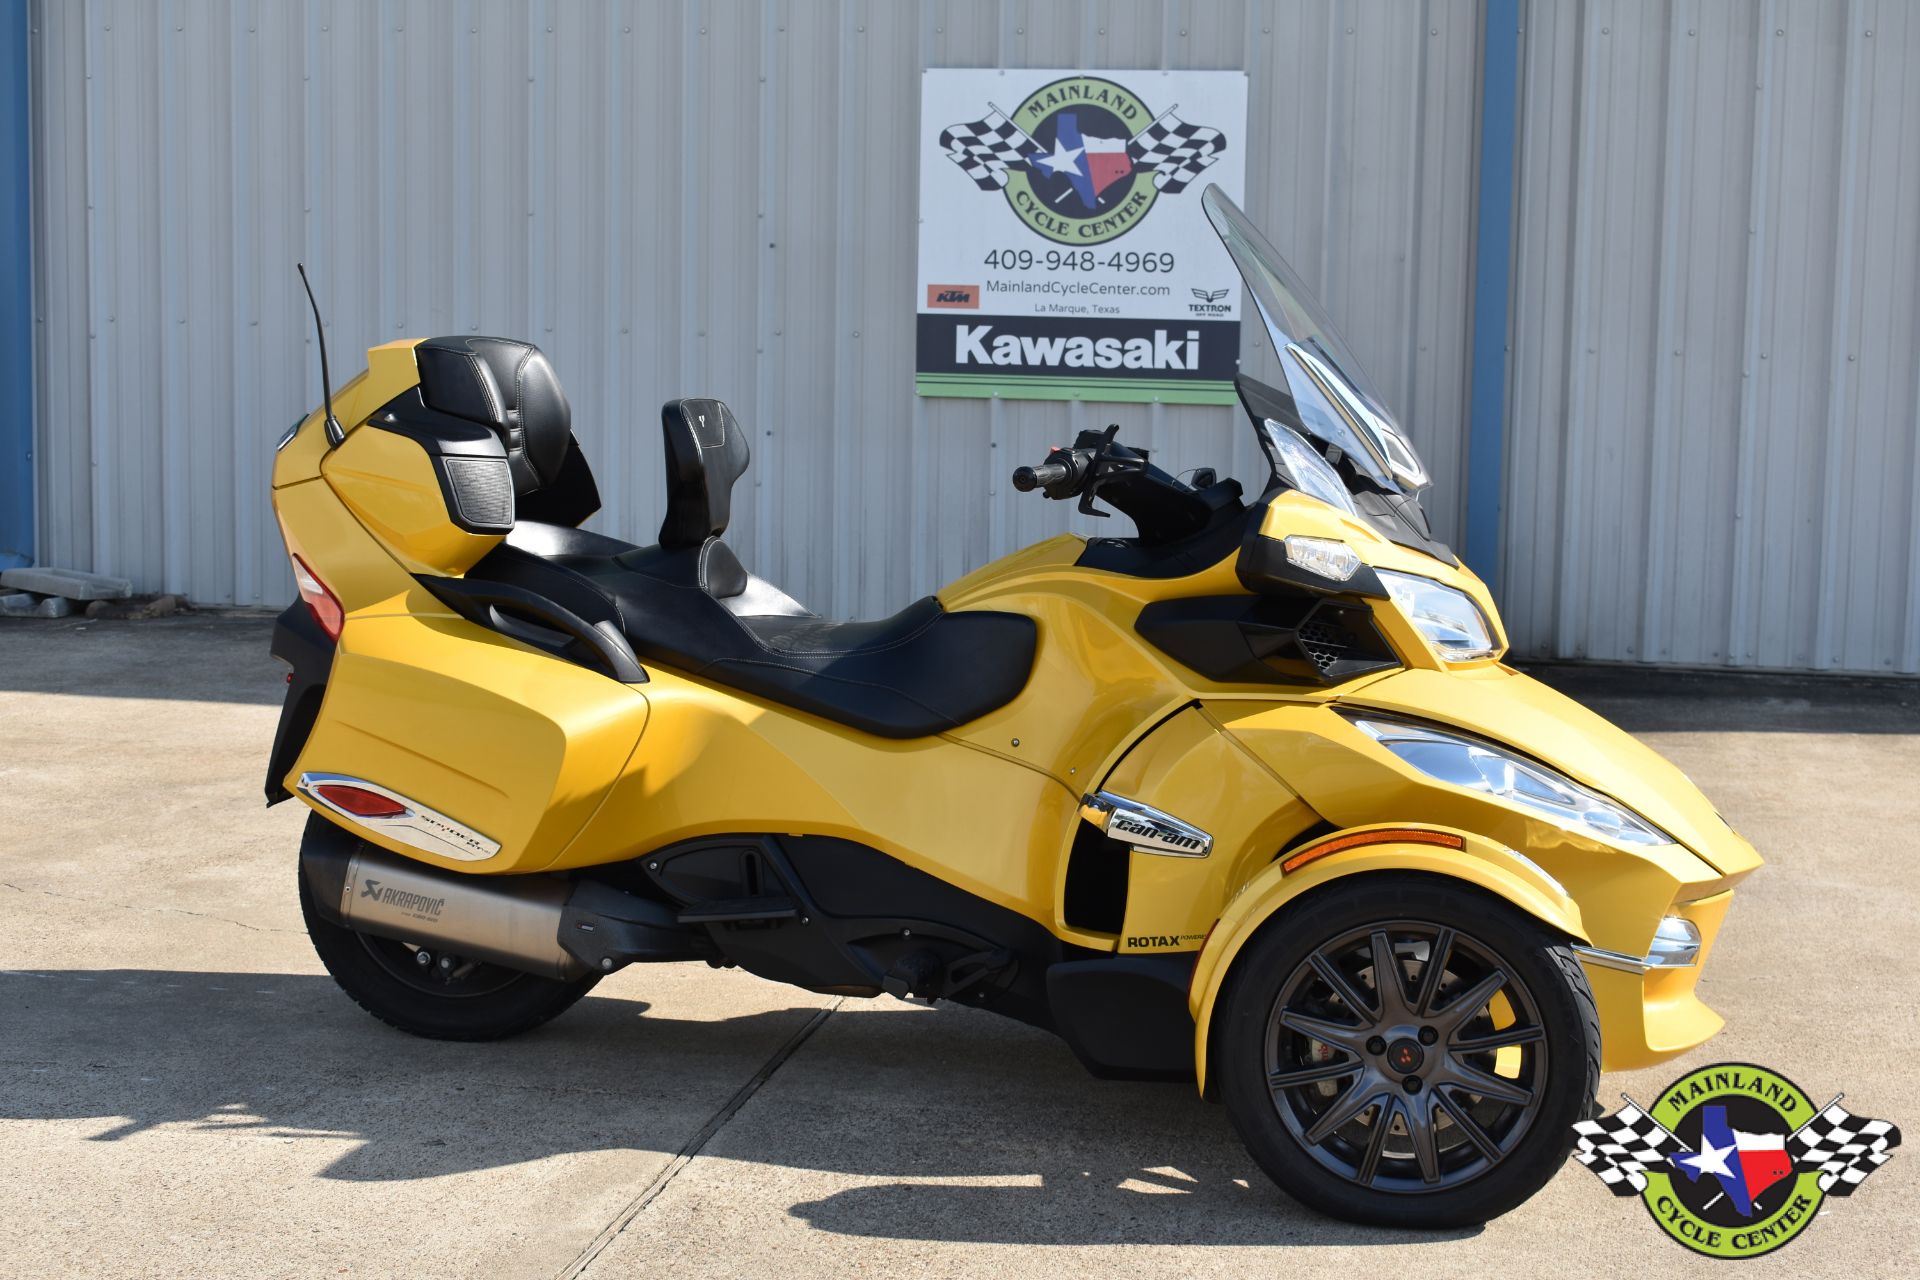 2013 Can-Am Spyder® RT-S SM5 in La Marque, Texas - Photo 1